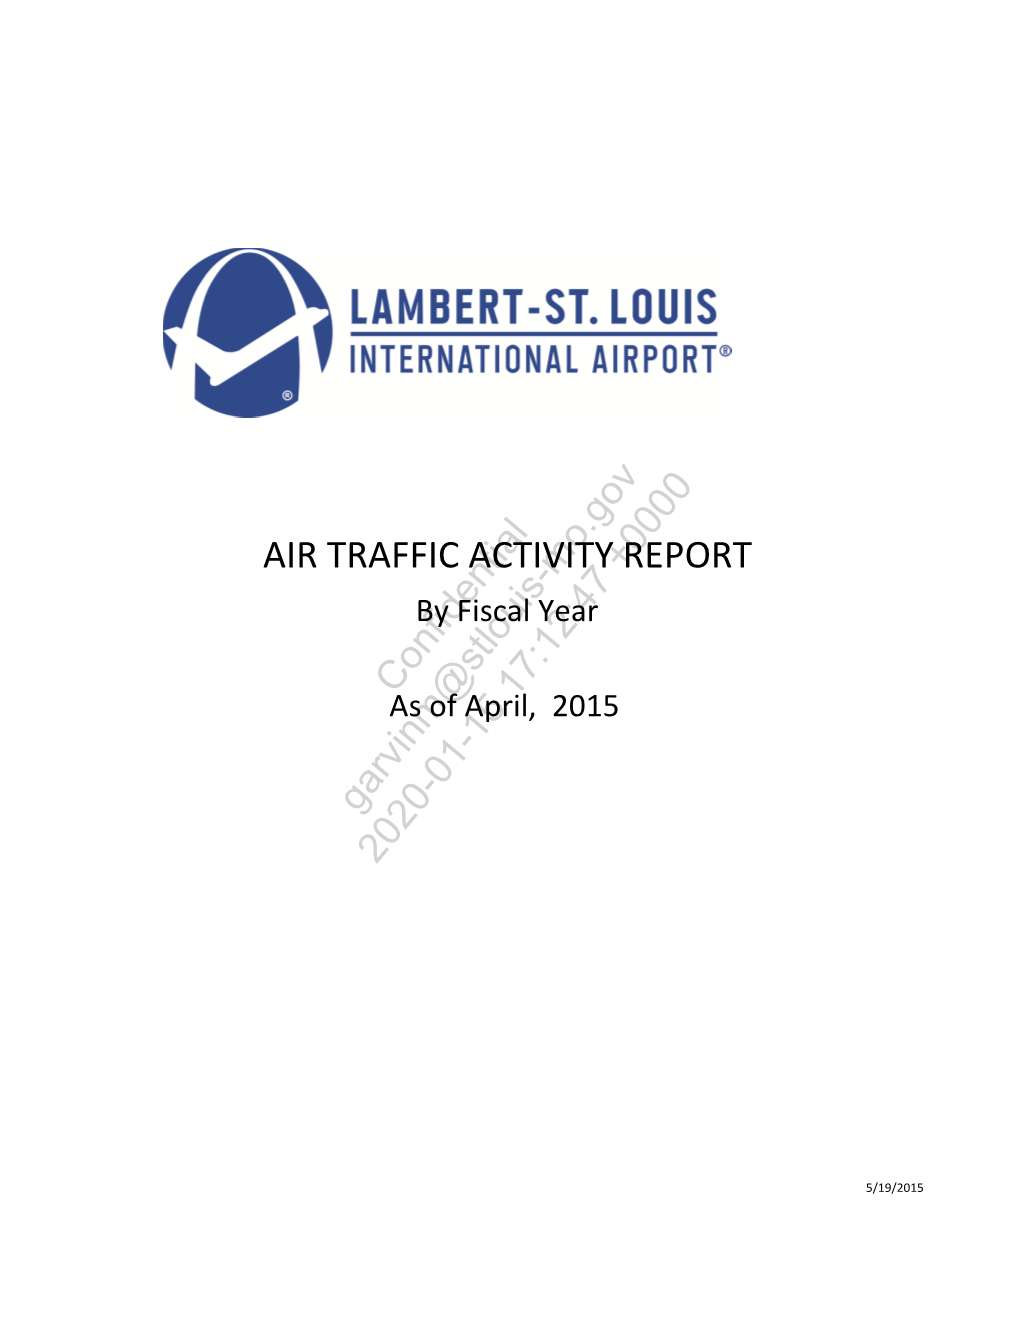 AIR TRAFFIC ACTIVITY REPORT by Fiscal Year